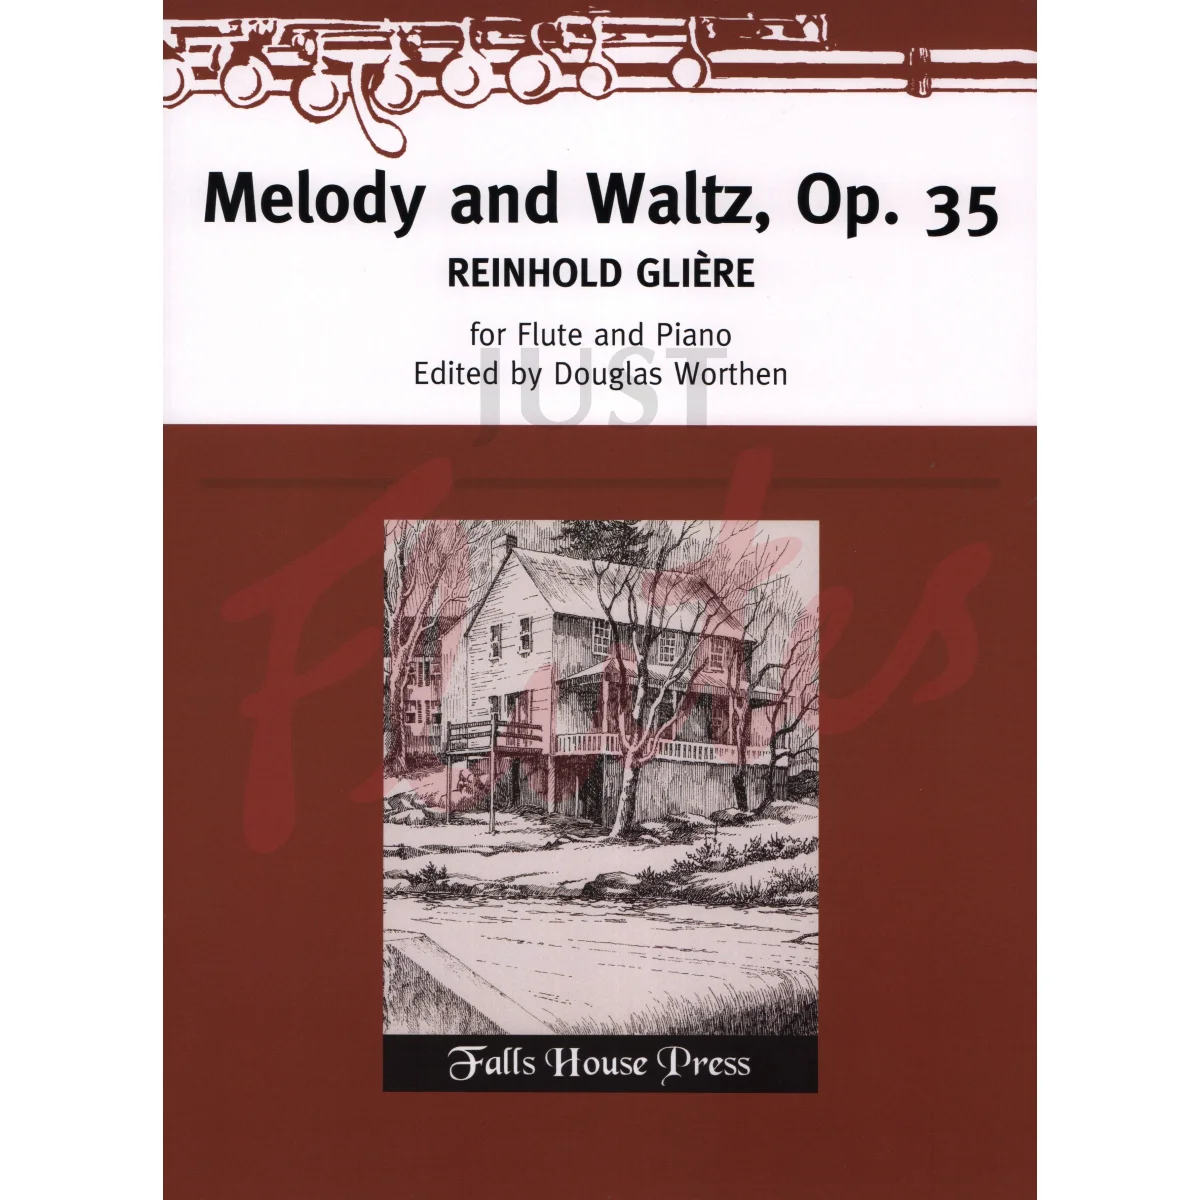 Melody and Waltz for Flute and Piano